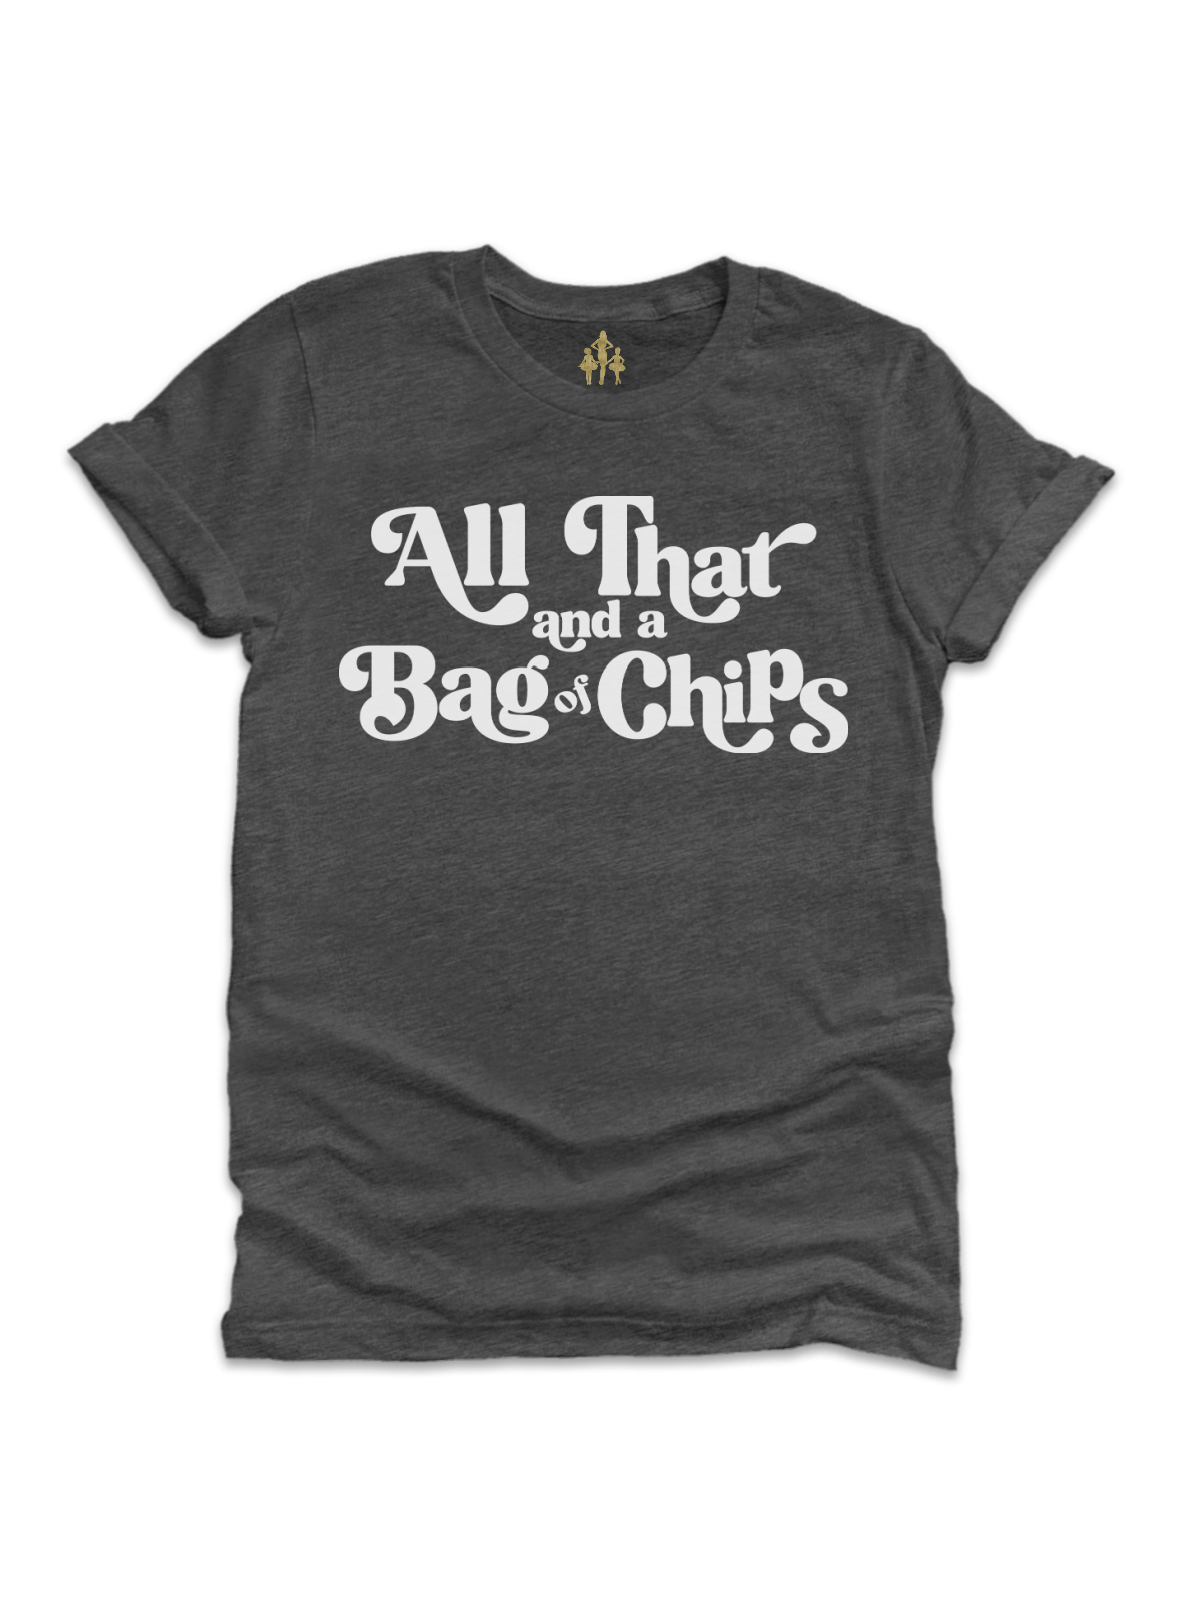 All That and a Bag of Chips Mommy and Me Shirts Set